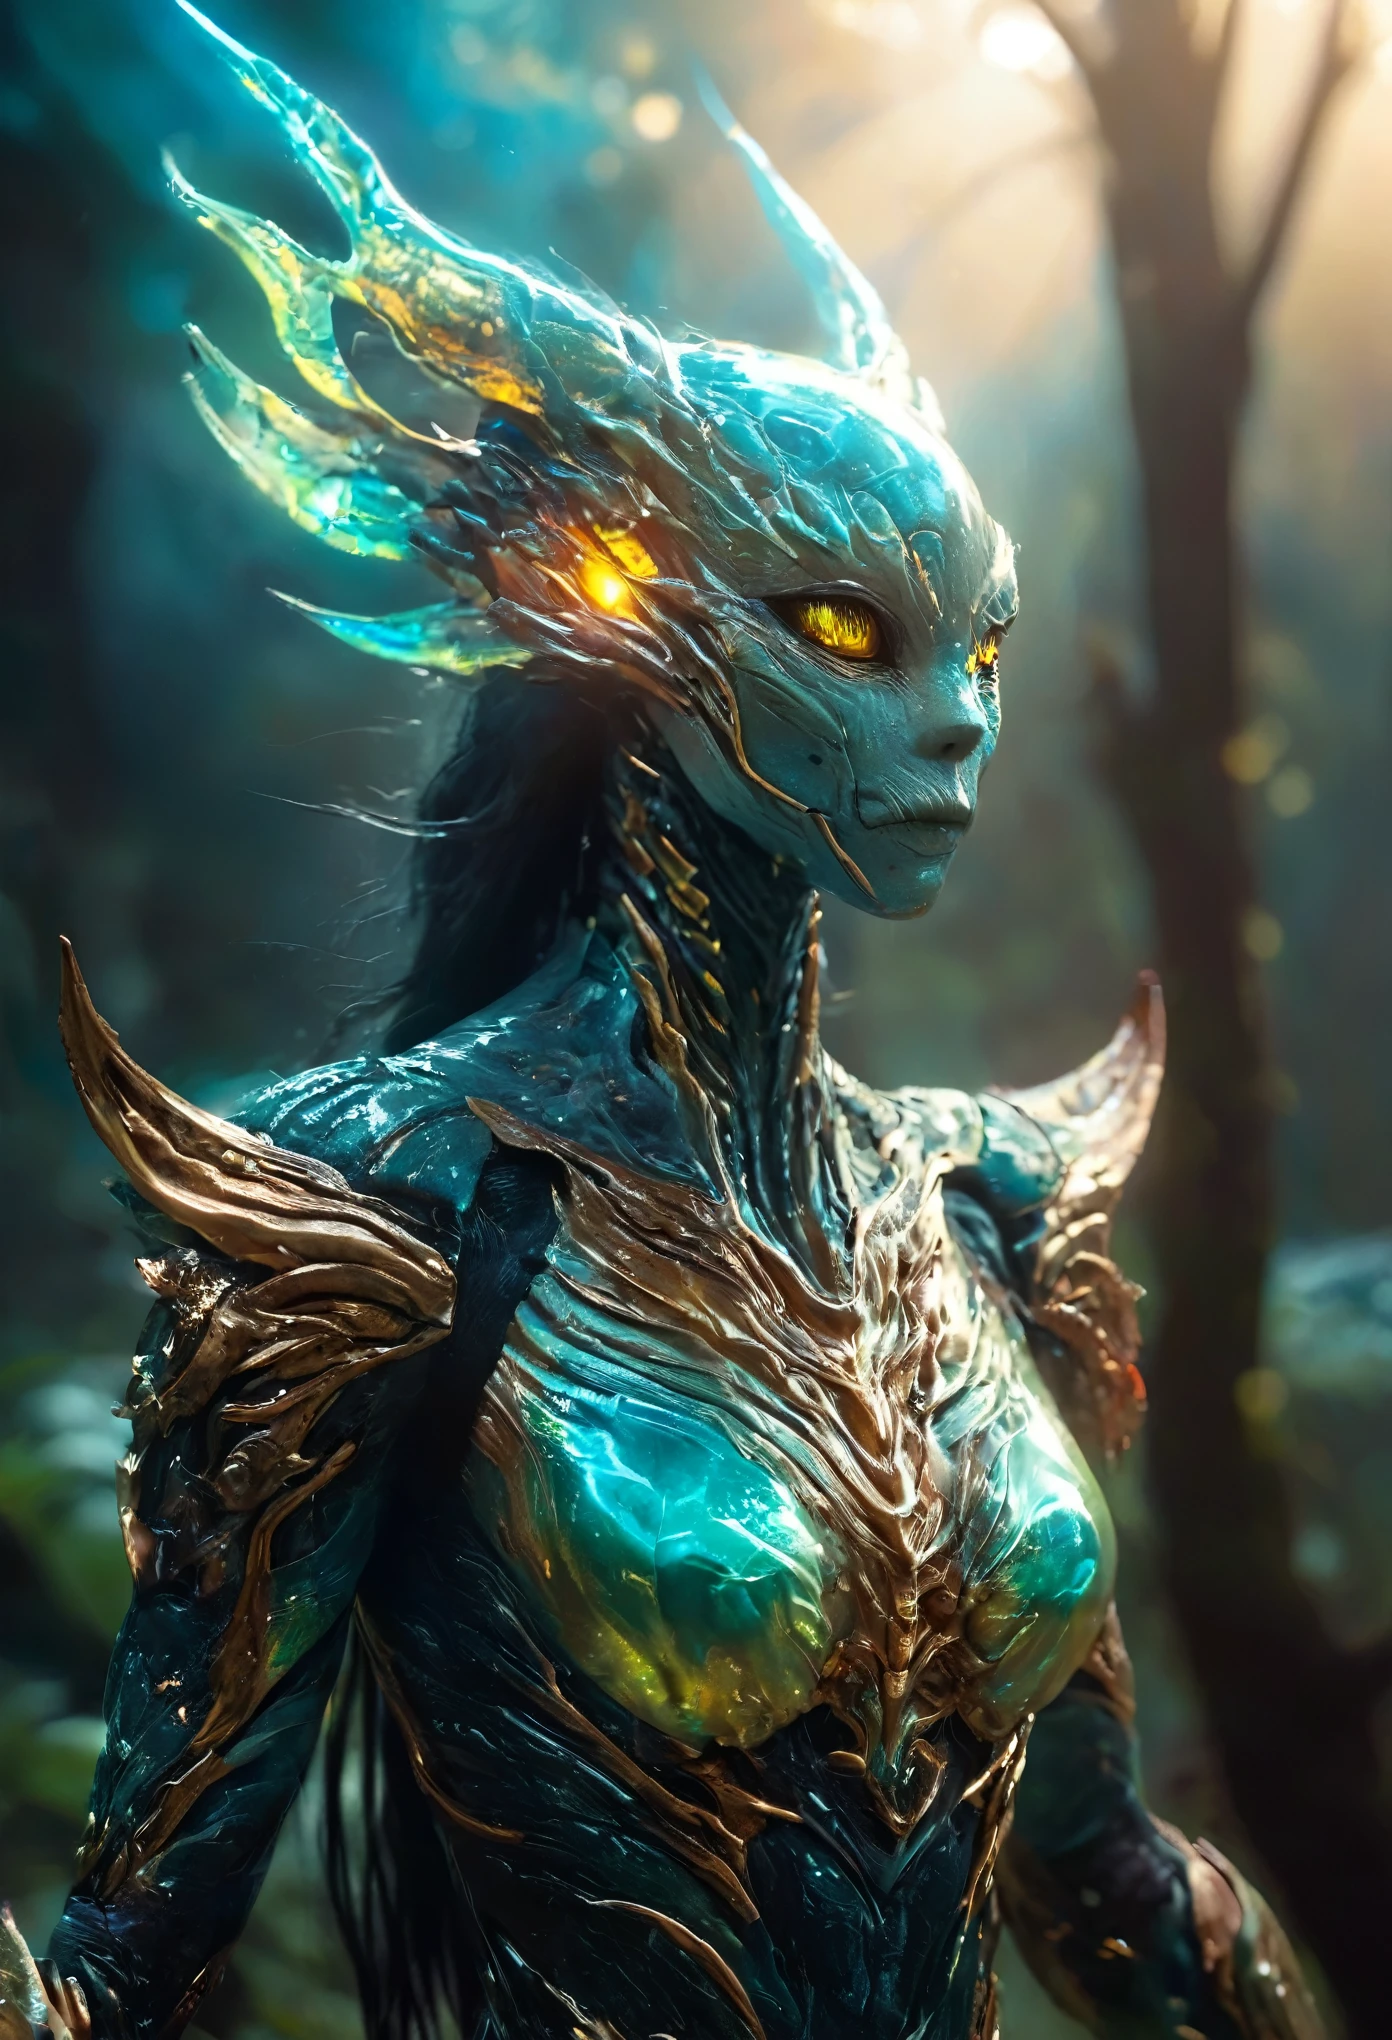 (High resolution,realistic,sharp focus),Humanoid alien creature with a vertically split face forming a mouth shape,beautiful predatory creature There is similar to a woman,Alien/monster hybrid,scary hunter,[cosmic,extraterrestrial] There is,organic matter,otherworldly predator,beyond life,length,flowing hair,earrings,shineing eyes,intense sight,[elegant,graceful],enchanting facial features,[sharp,pointed,elengthated] teeth,[toxic,toxic] tooth,intense,enchanting smile,Smooth yet muscular body,[curve,shape] There is similar to a woman,[graceful,Towering] before,Alien skin texture resembling iridescent scales,[ethereal,luminescent] shine,[Evil,Unlucky] aura,Slurping,bipedal walking,[tranquility,predatory] enchanting footsteps,hypnotic] dance,[spooky,Unforgettable] grace,contrasting colors,[darkness,Shadow] hug a living thing,dystopian background scenery,[cosmic,Milky Way] background,Unlucky celestial bodies,pulsating clouds,[extraterrestrial,surreal] vegetation,rays of ethereal light [filtering,caress] scene,dramatic chiaroscuro lighting,penetrating the darkness,Create an intimate yet frightening atmosphere.